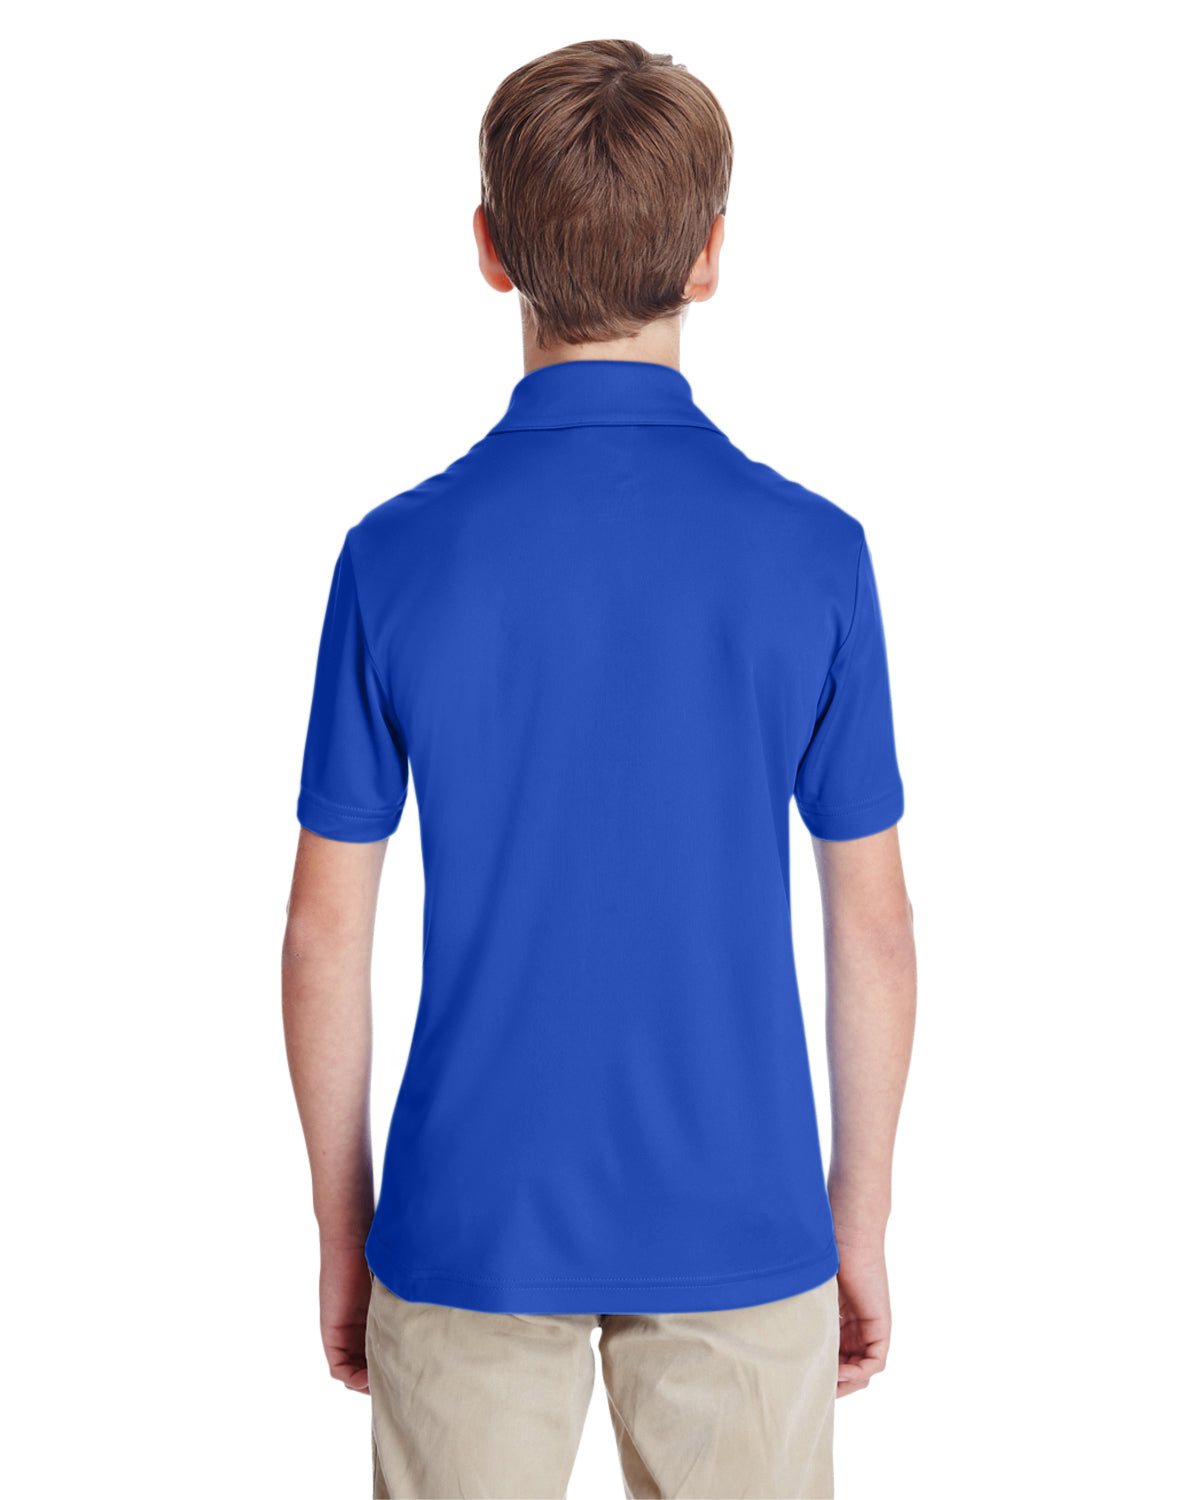 Team 365® Youth's Zone Performance Polo